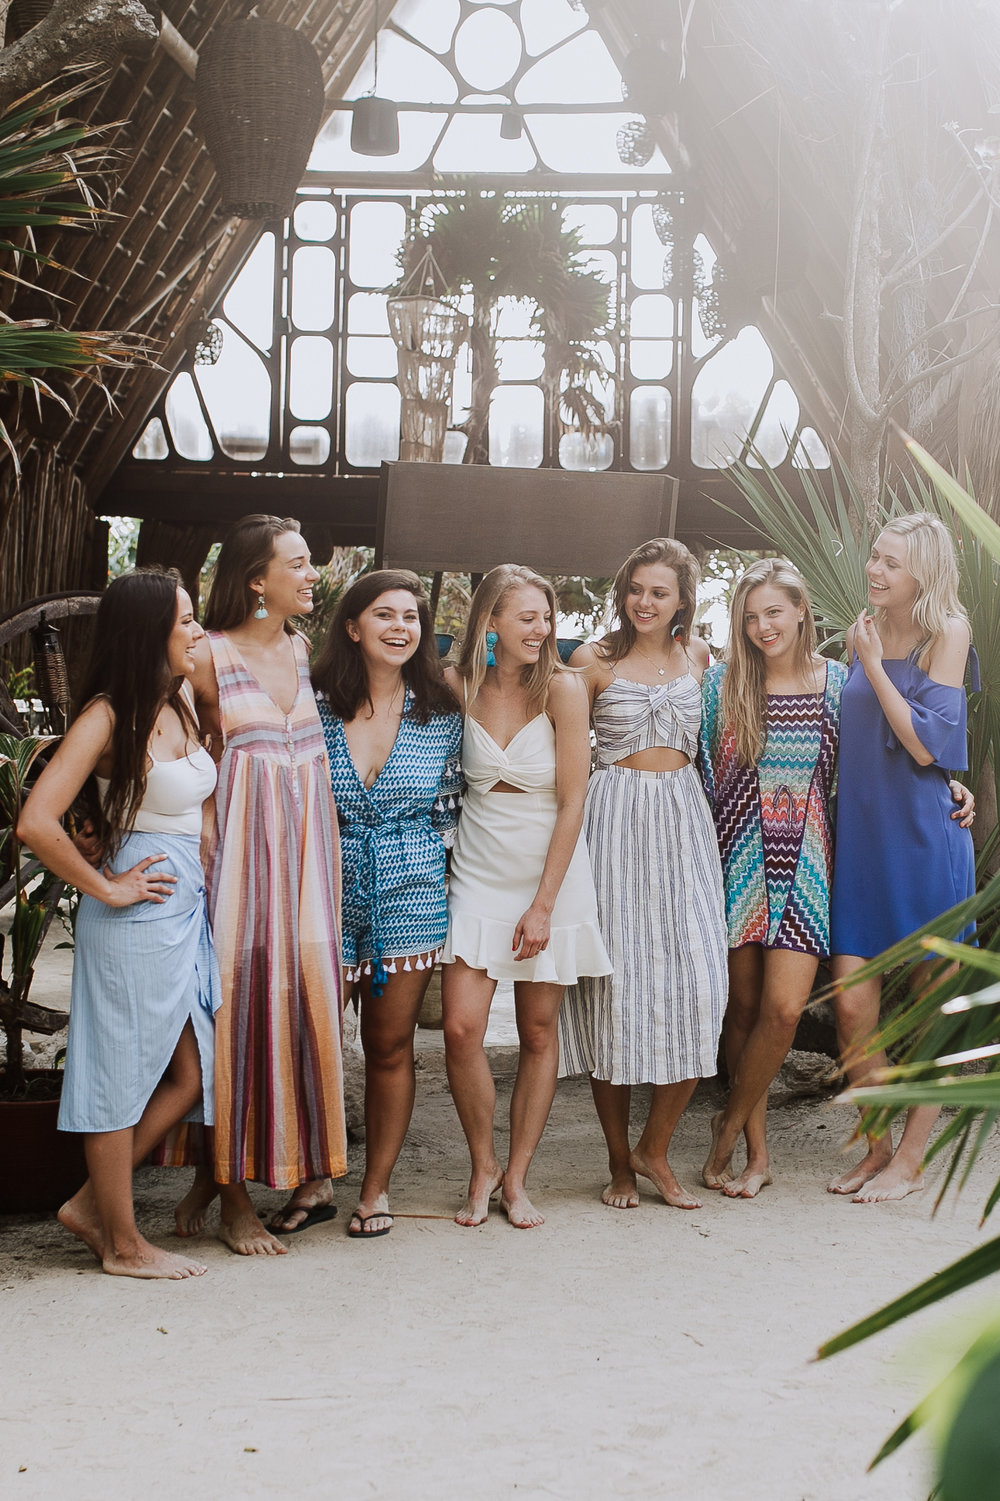 20 Amazing Photos To Inspire Your Bachelorette Party | Flytographer